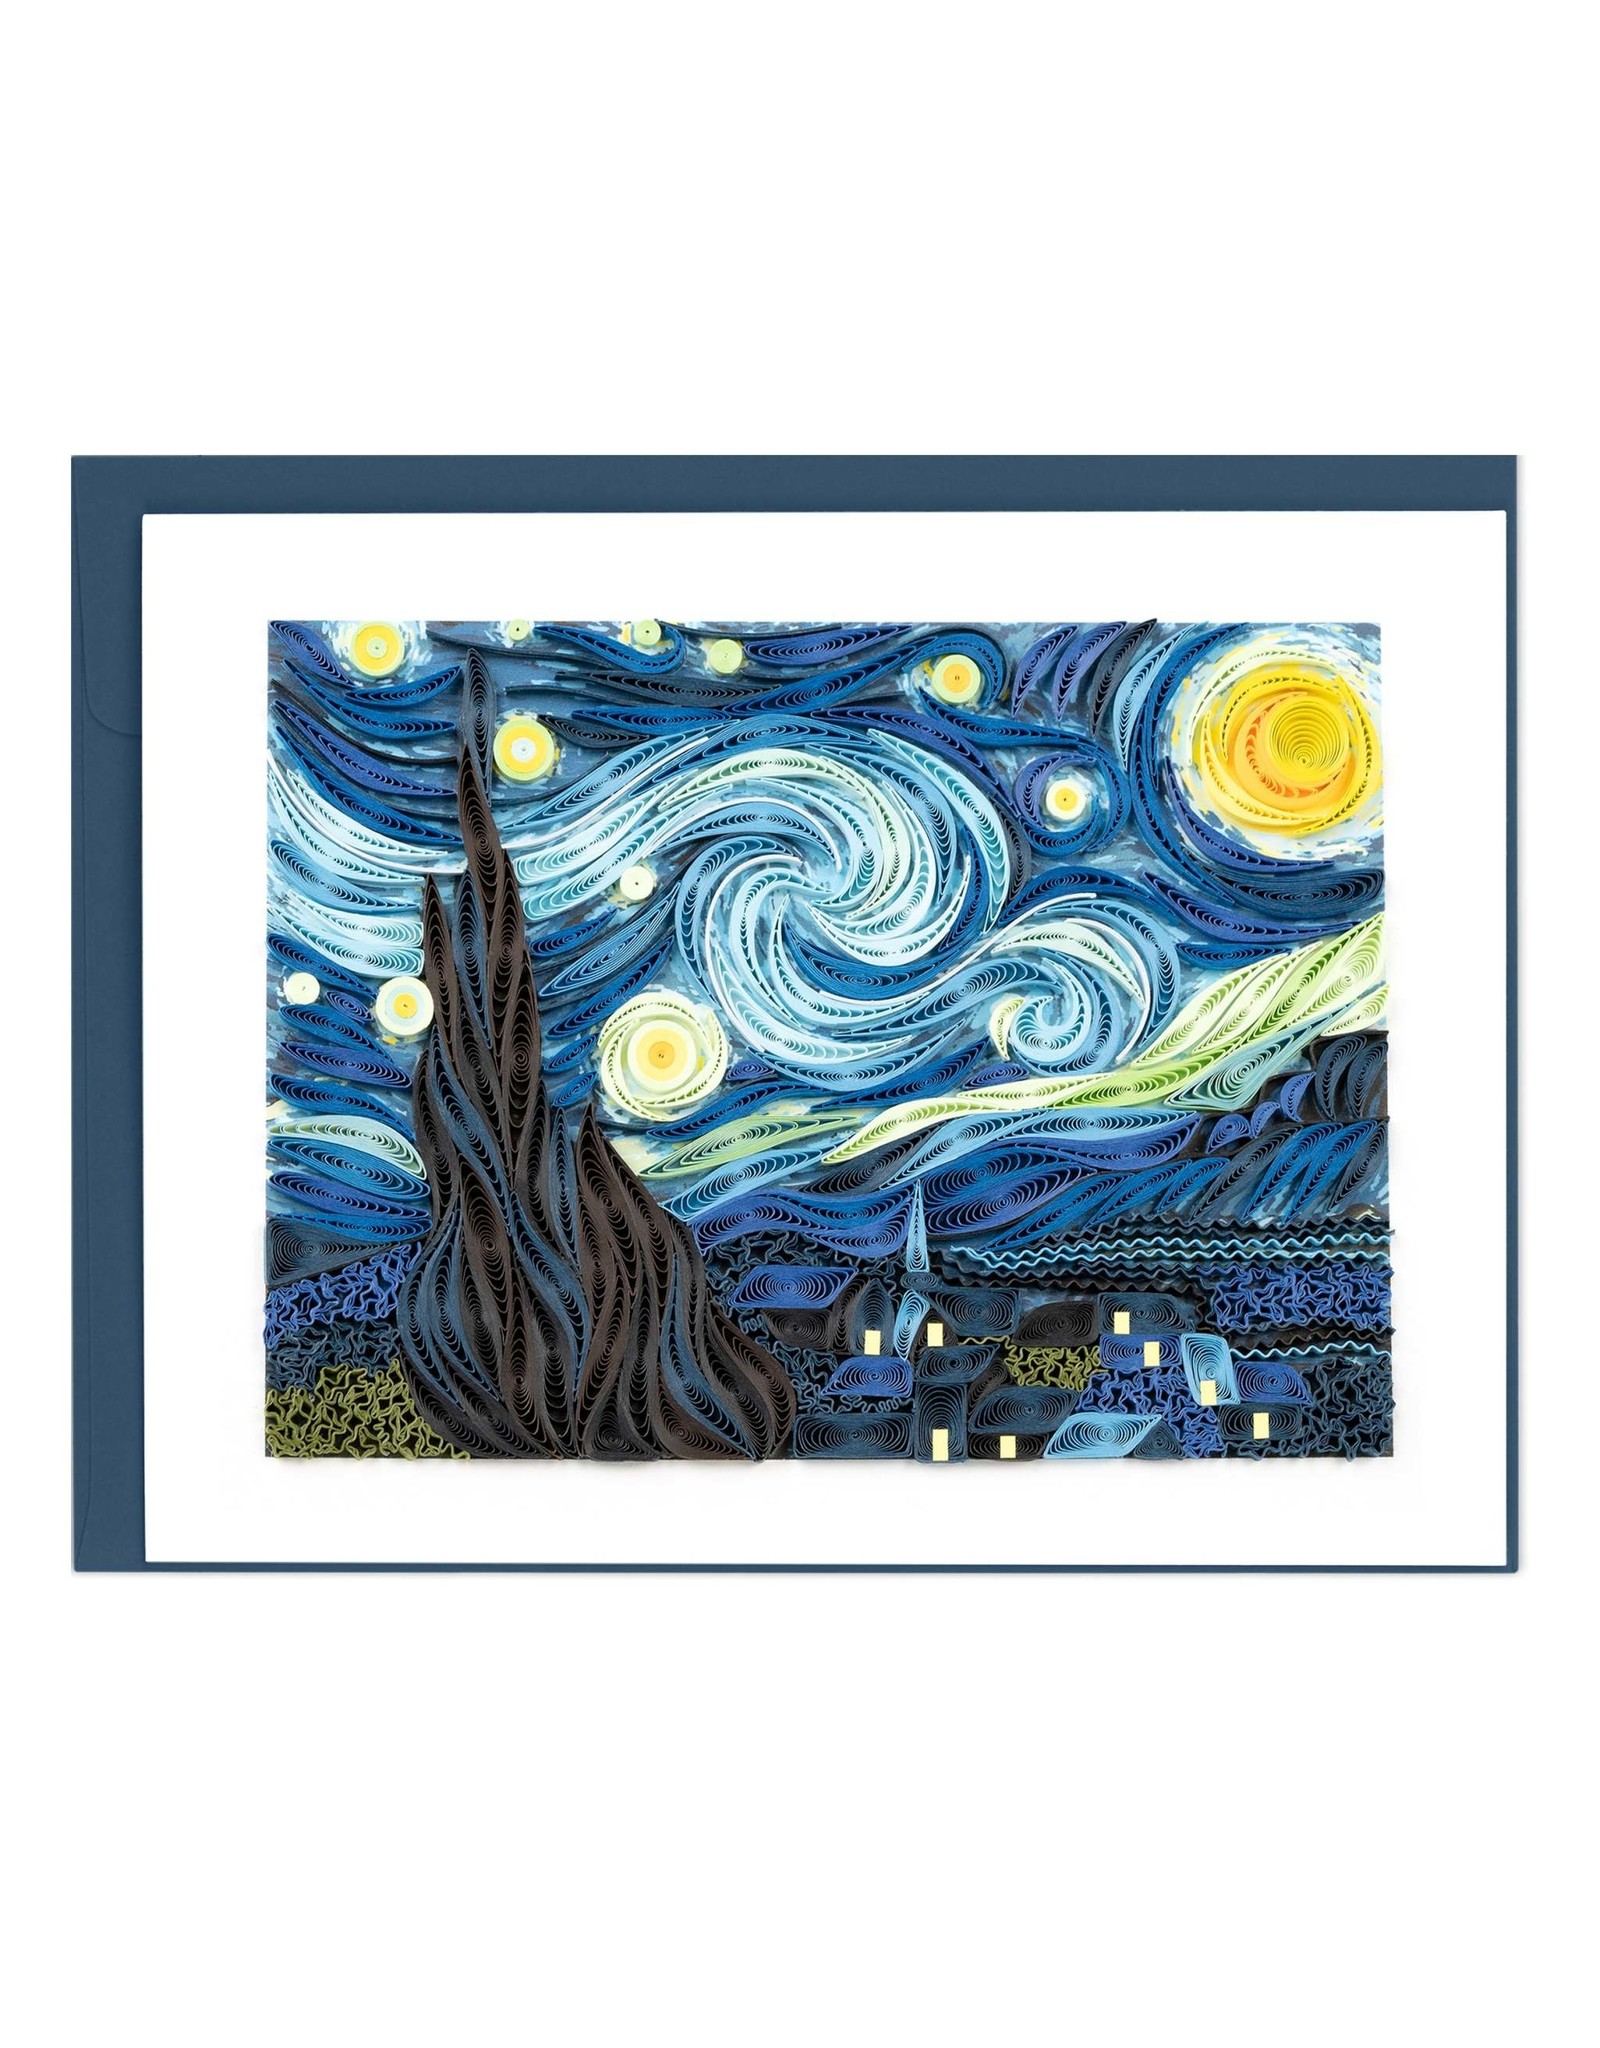 Quilling Card Quilled Artist Series Card Van Gogh Starry Night